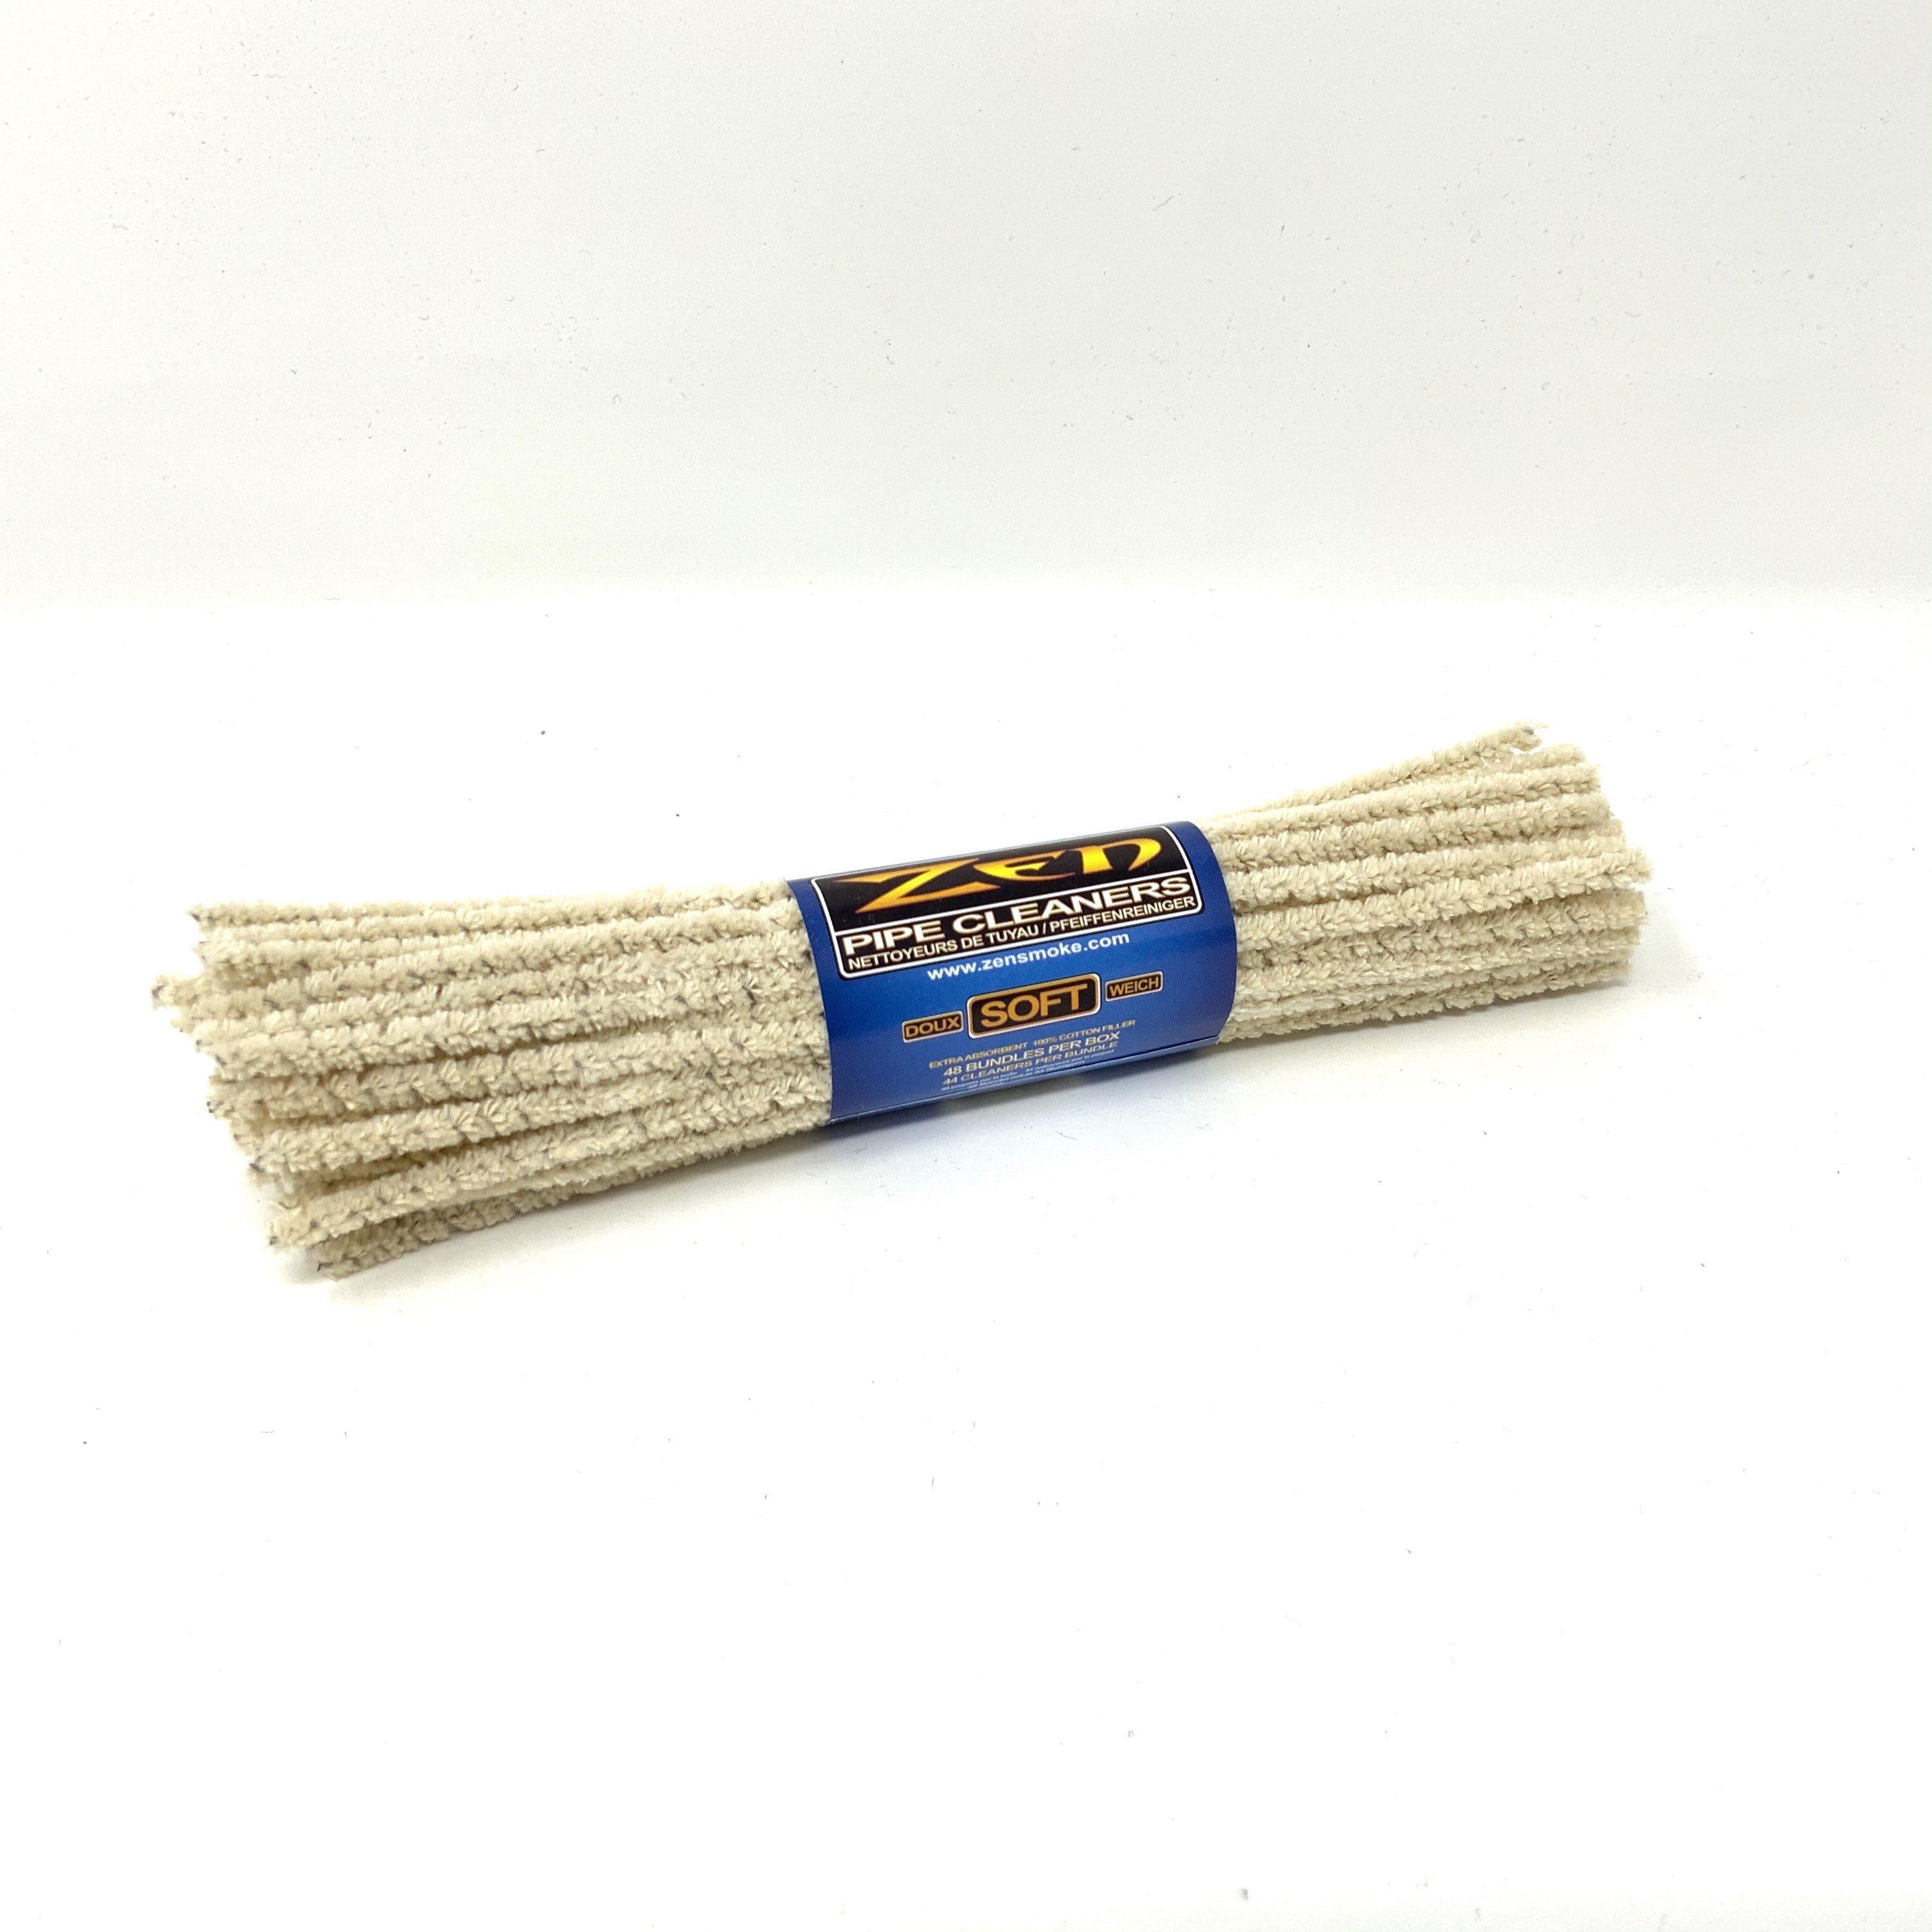 Pipe Cleaners - The Best Way to Keep Your Pipes Clean - MUXIANG Pipe Shop